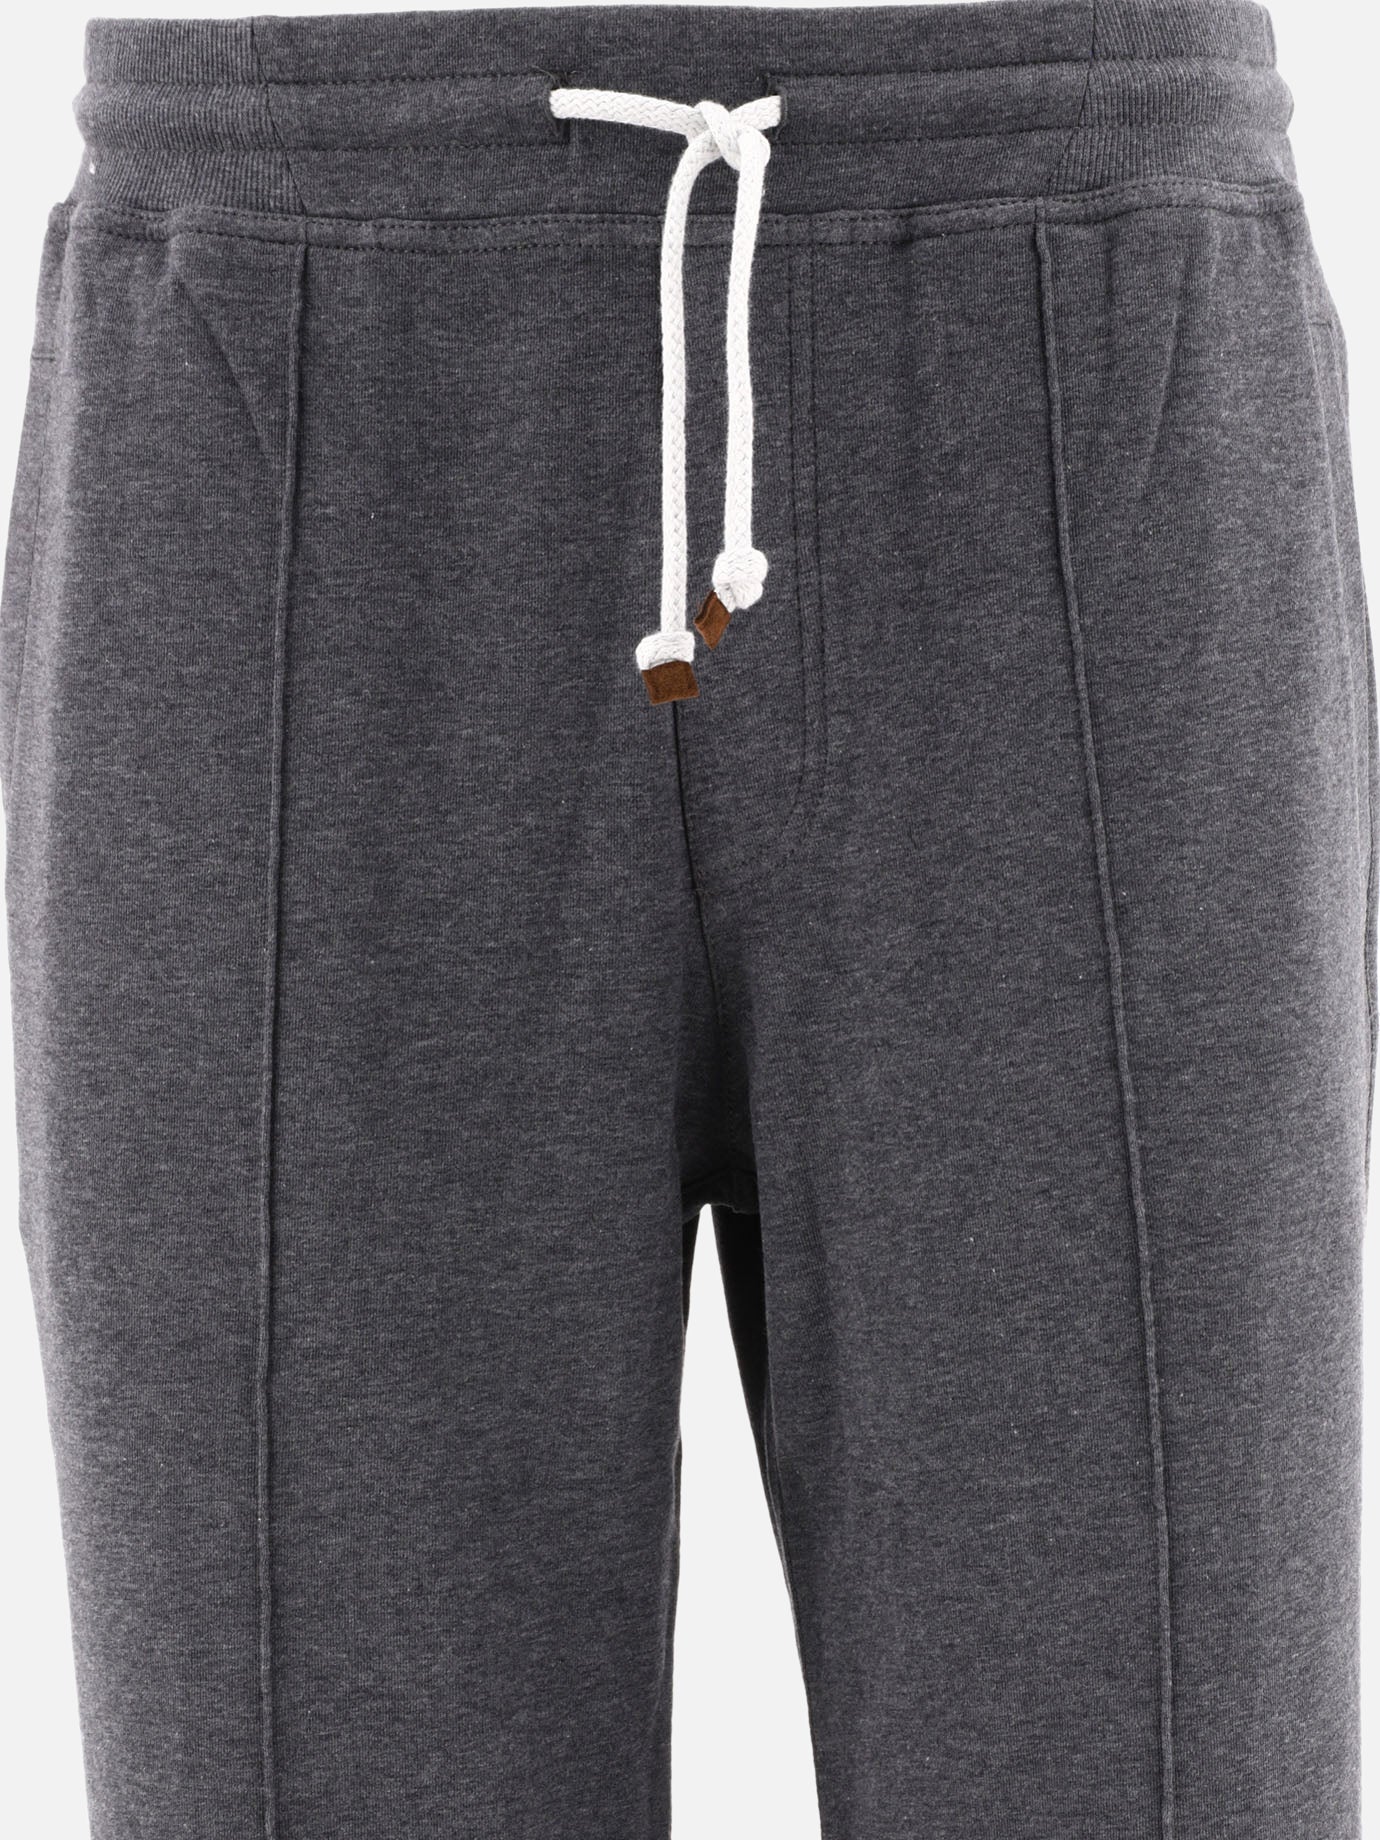 Techno joggers with crête detail